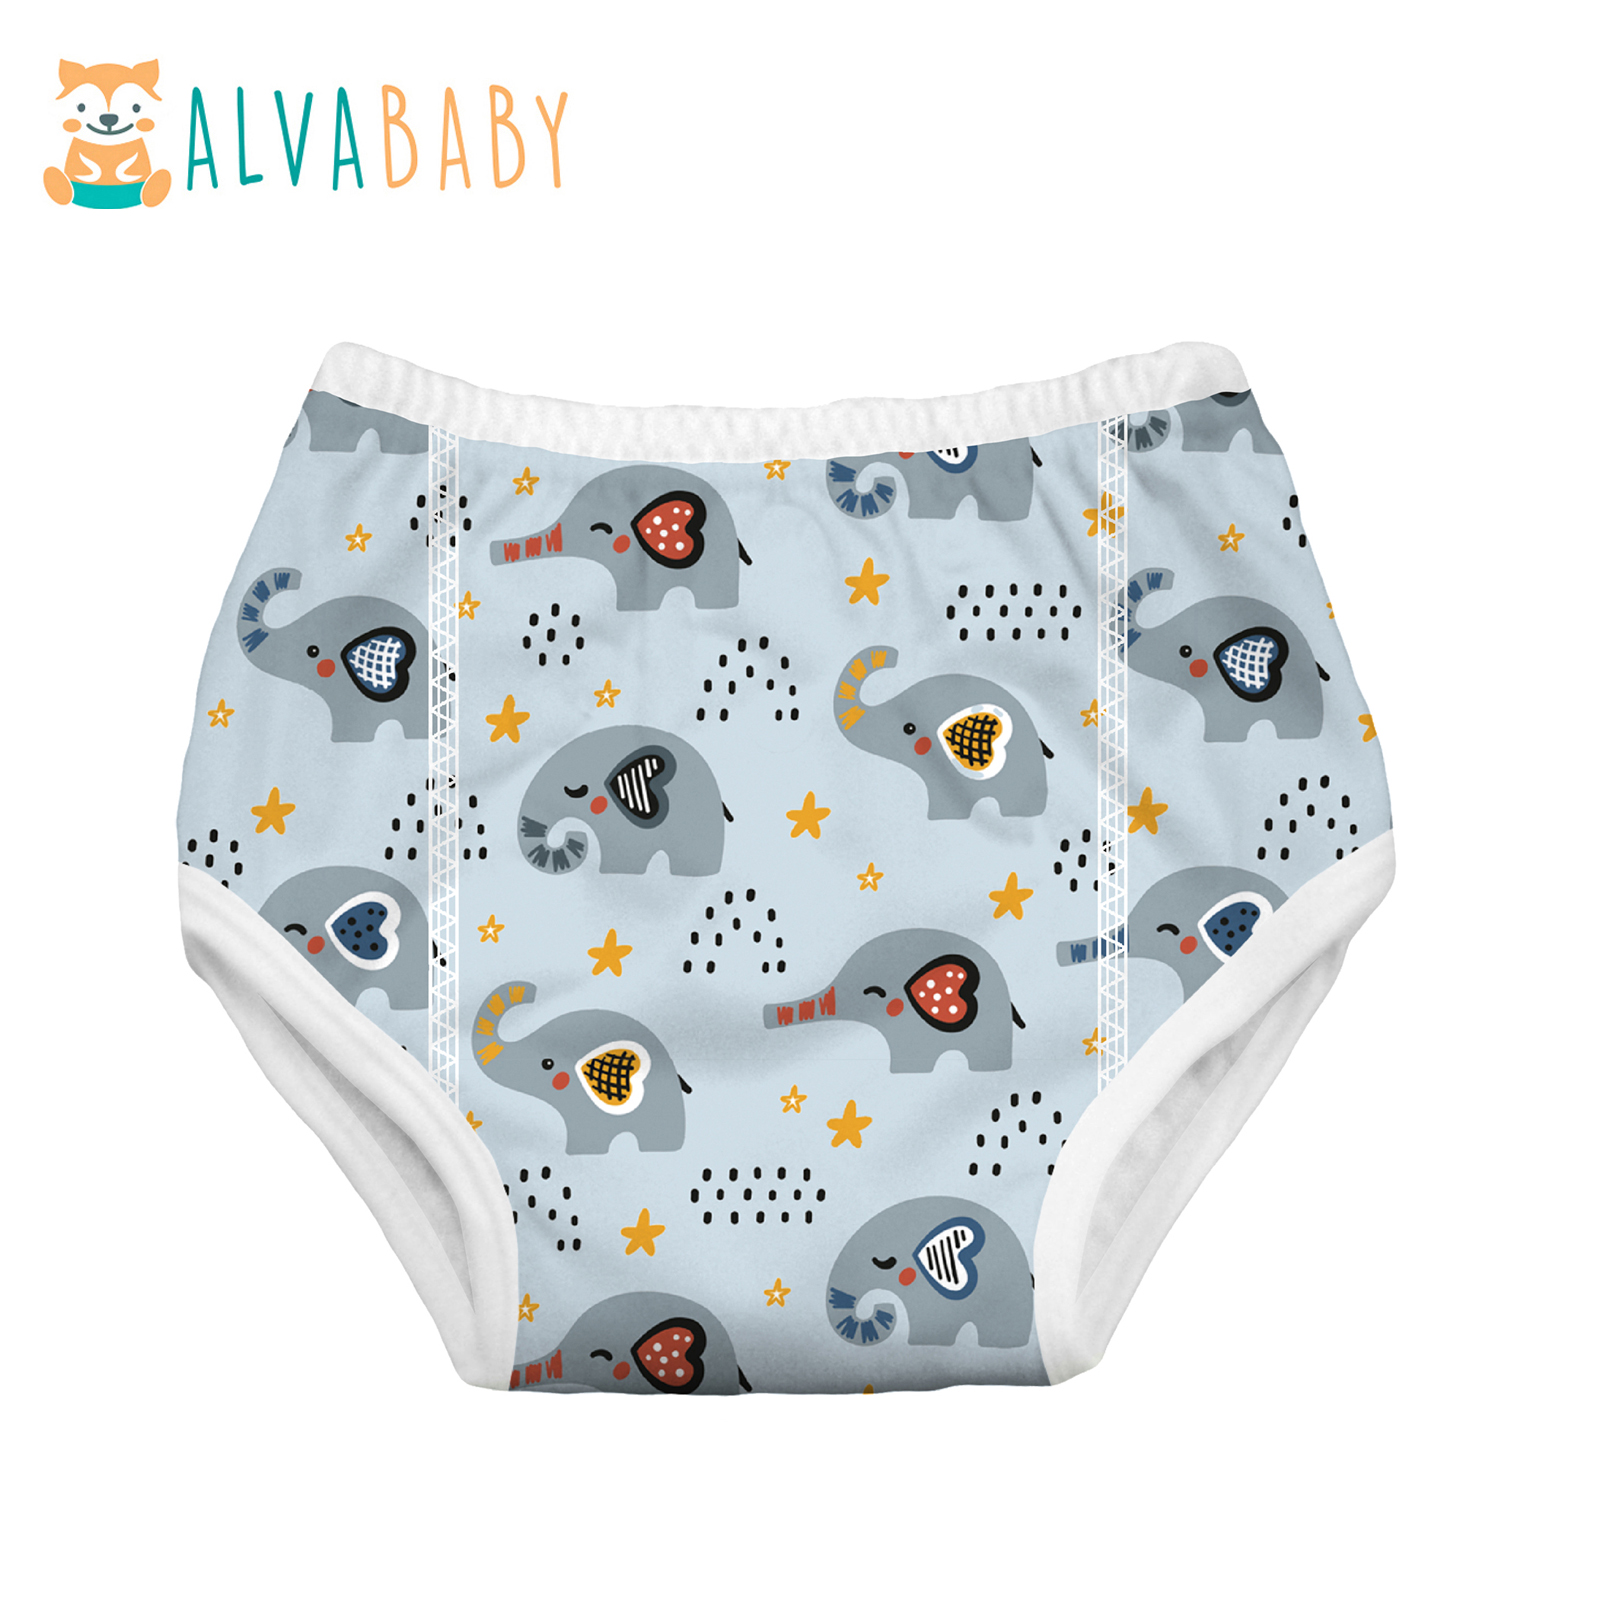 ALVABABY New Cotton Training Pant Potty Training Pack of 6PCS for